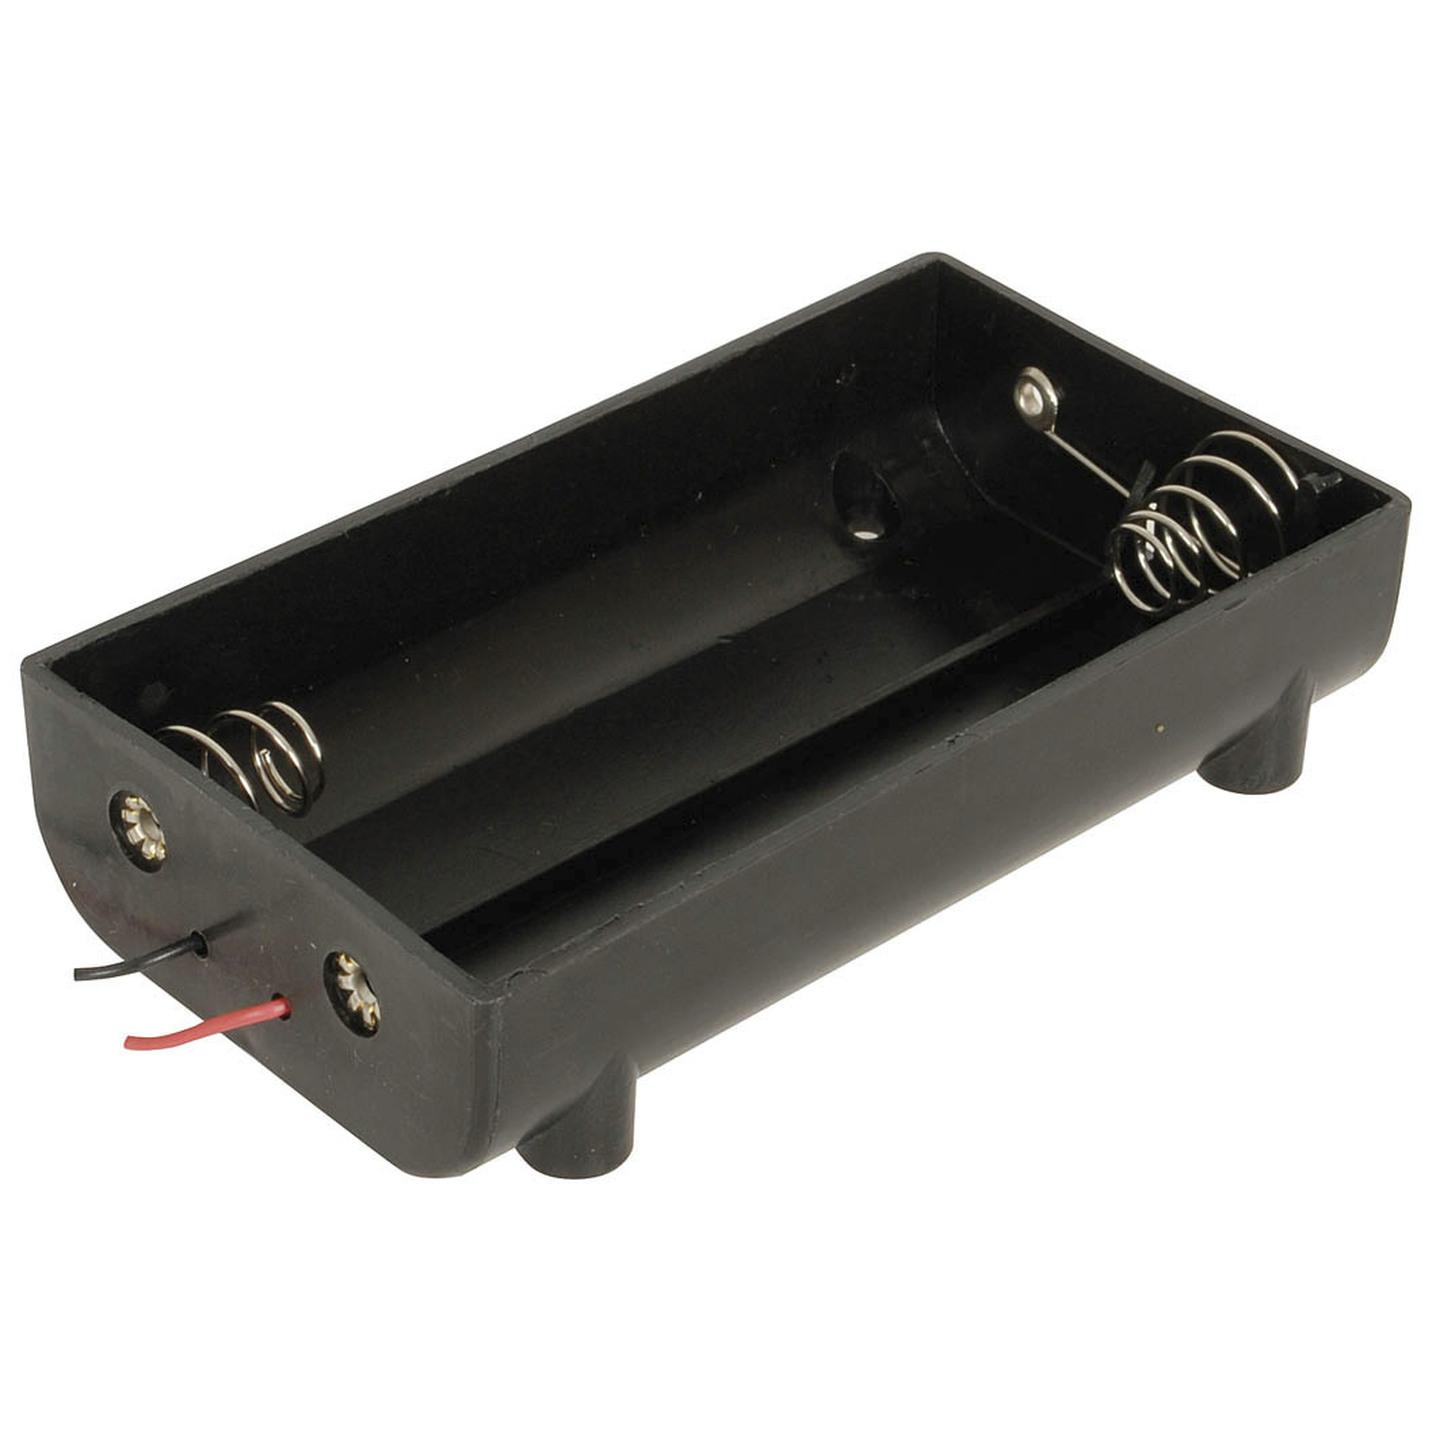 4 X D Cell 2 Rows of 2 Battery Holder